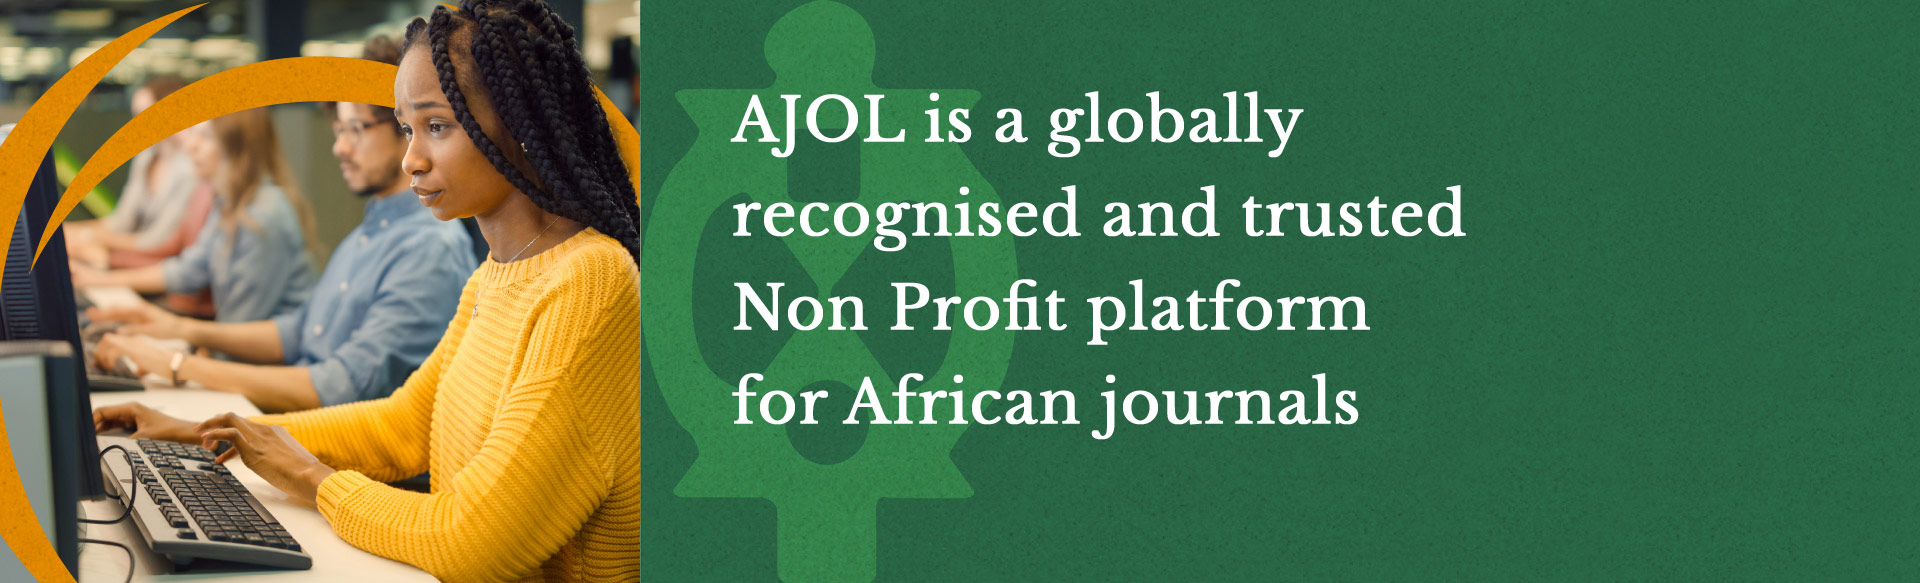 AJOL is a globally recognised and trusted Non Profit platform for African journals